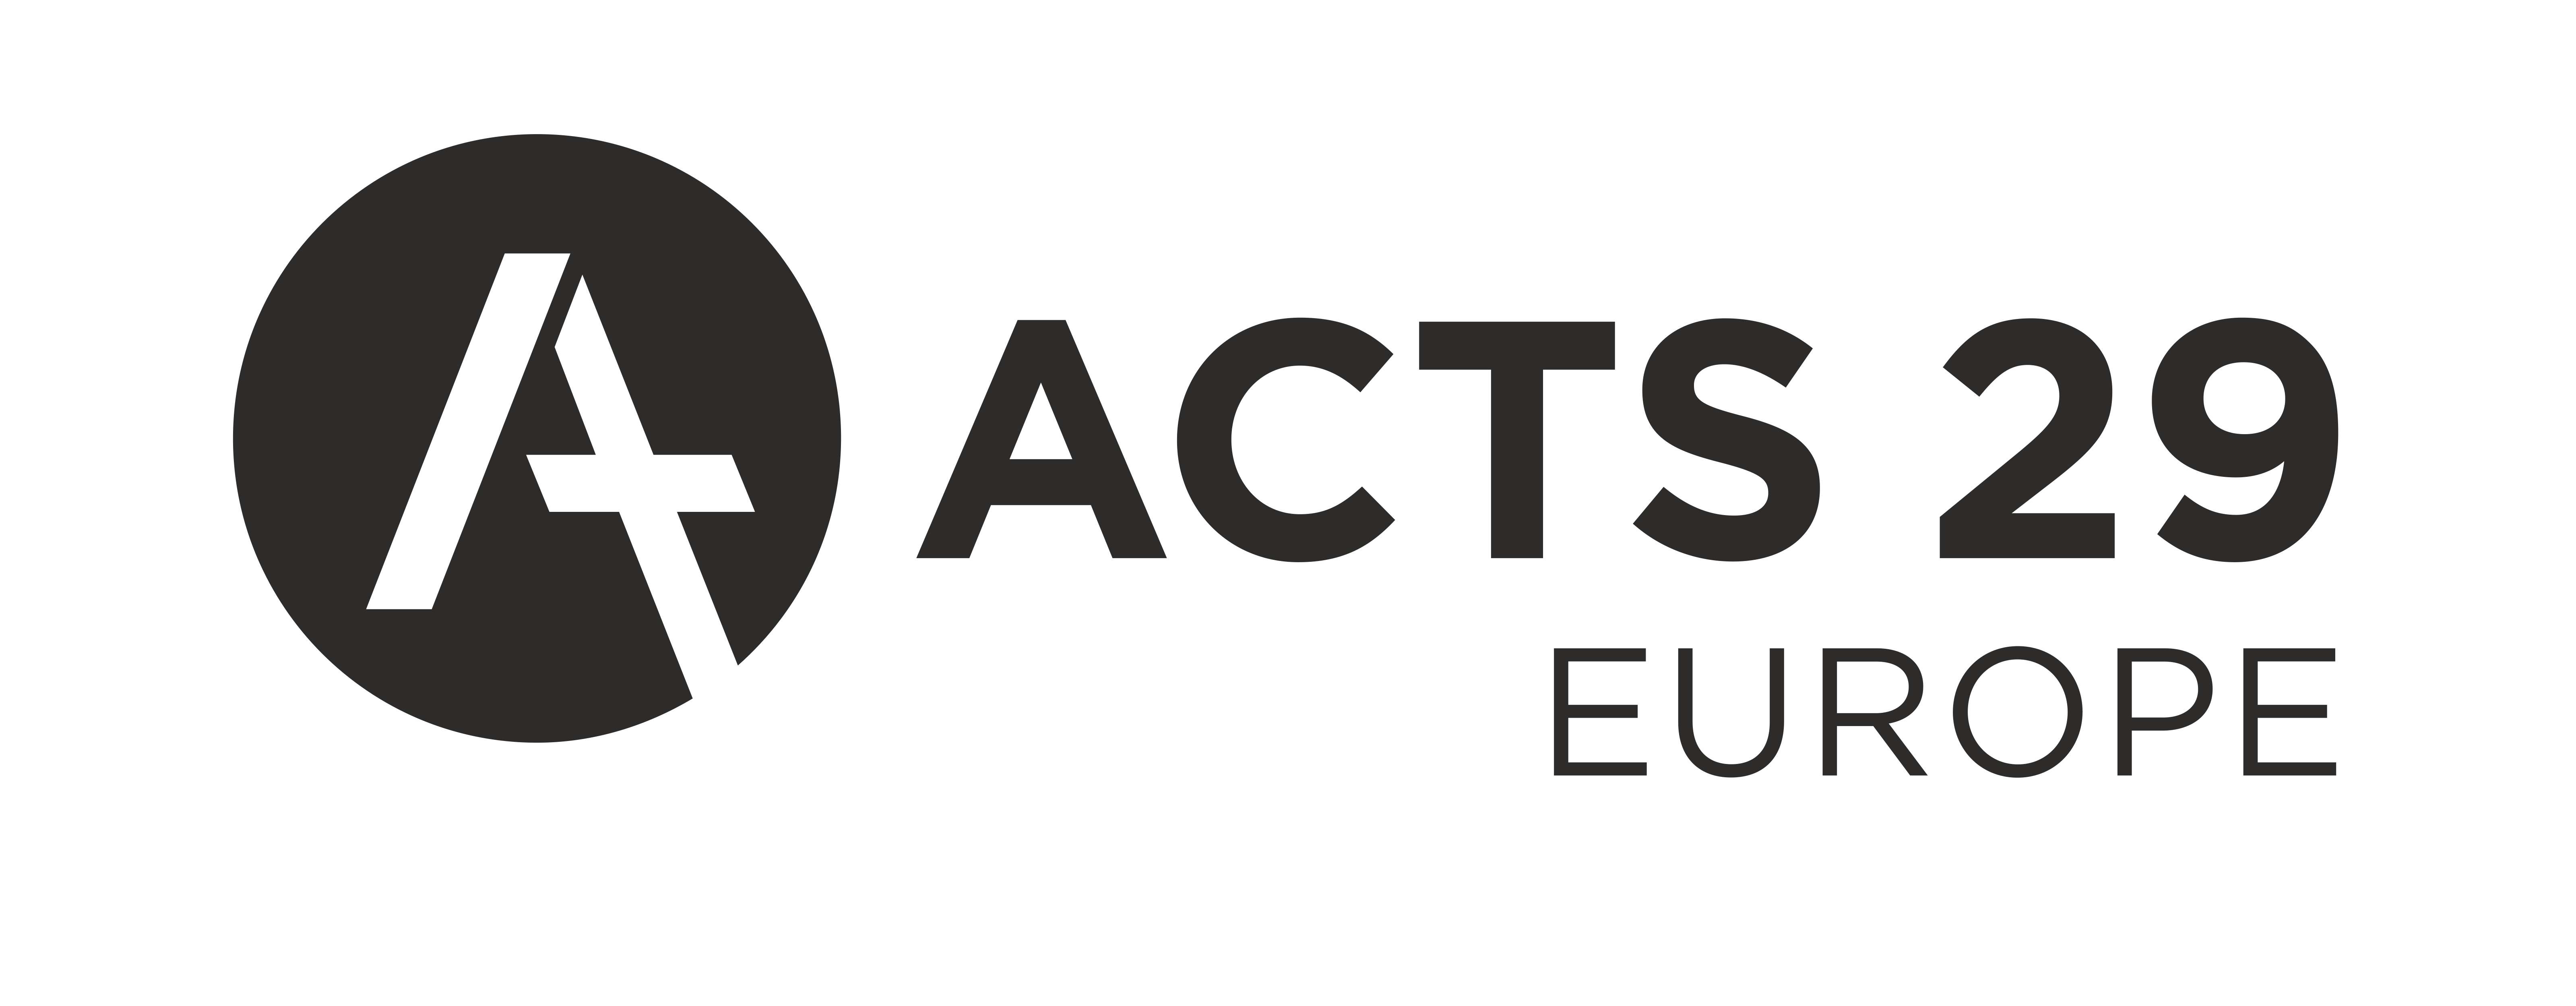 Acts 29 Europe logo